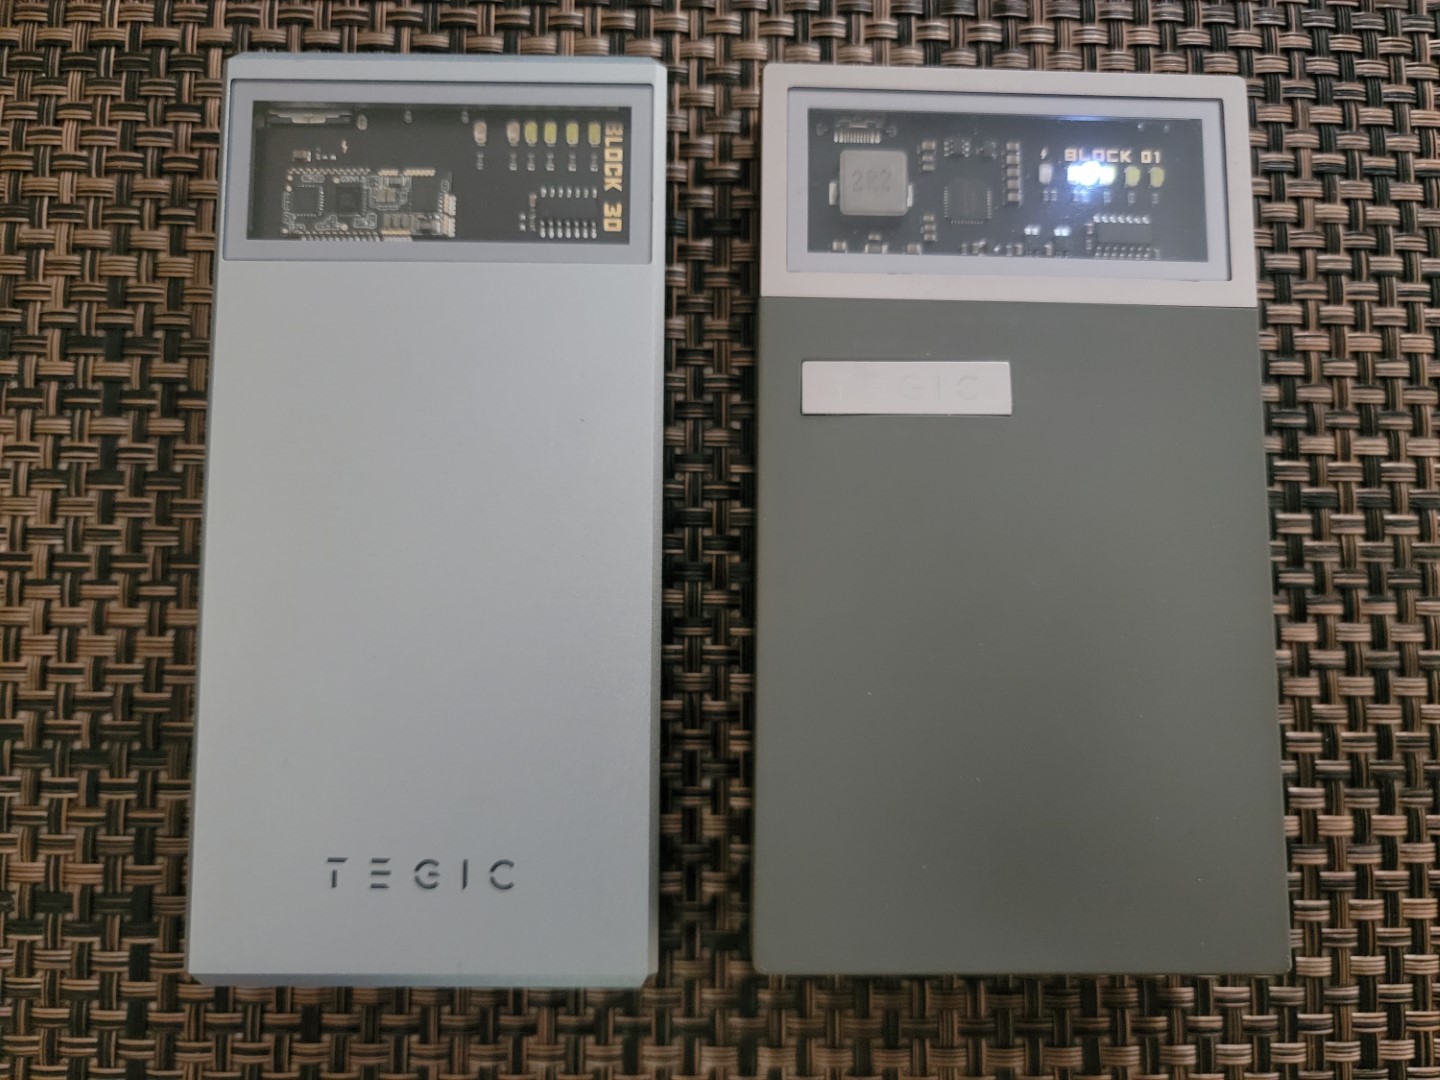 TEGIC Block 30 compared with the TEGIC Block 01 with LEDs turned on 2 - Front